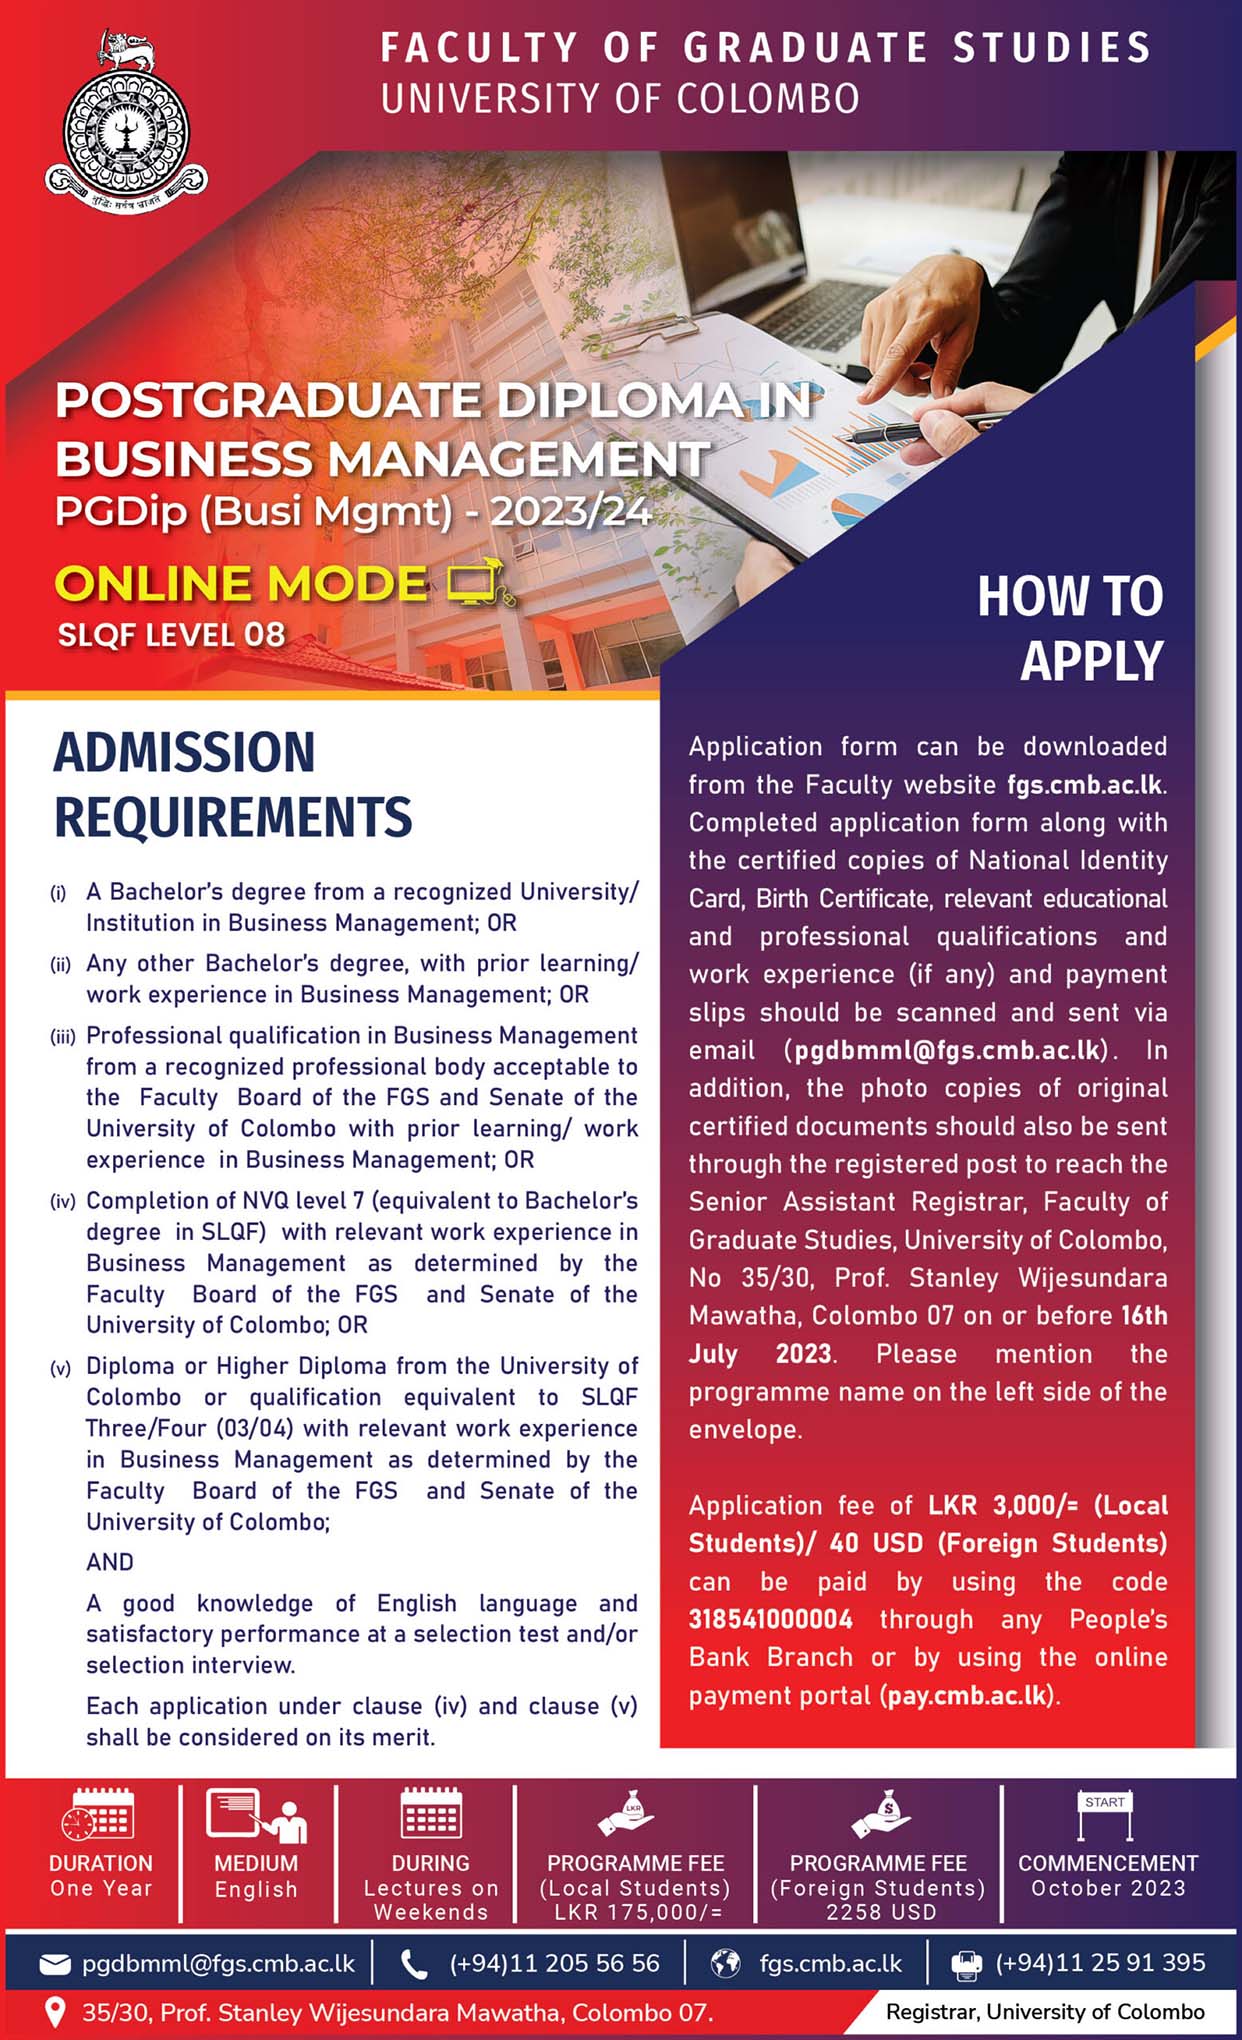 Call for Applications - Postgraduate Diploma in Business Management (PGDip in Busi Mgmt) 2023/24 (Online Mode) from the Faculty of Education, University of Colombo